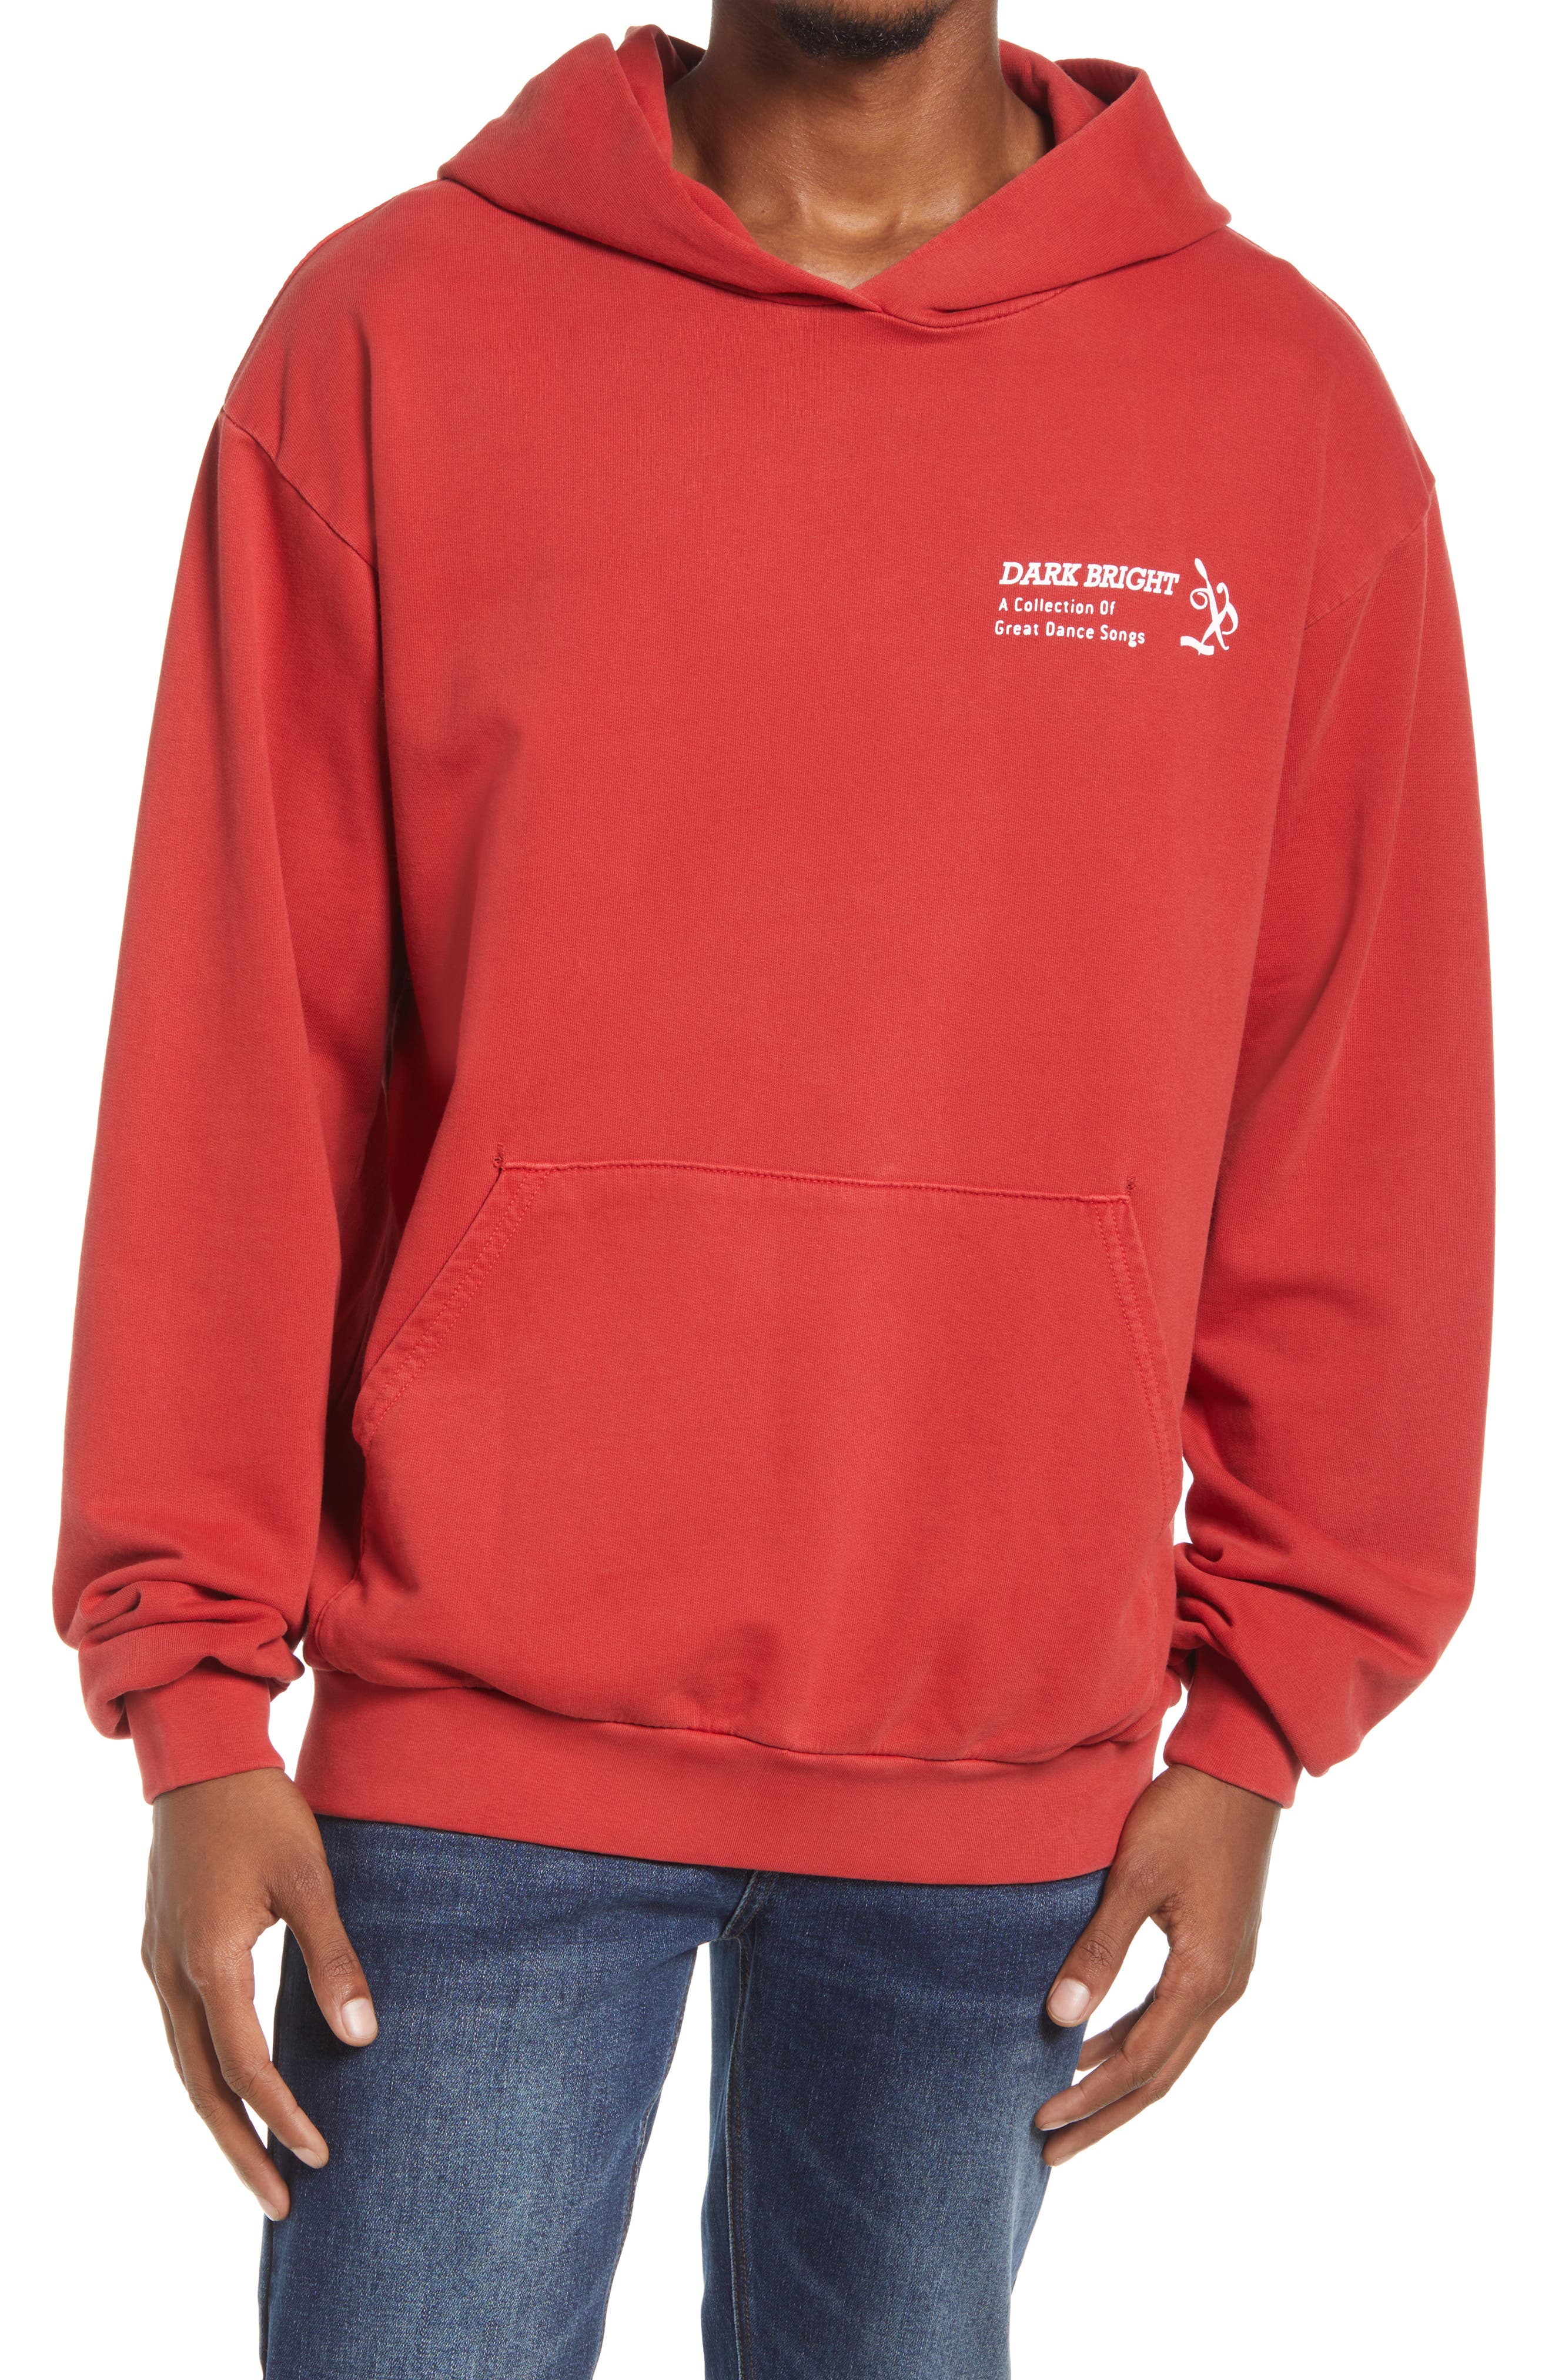 DARKBRIGHT Dance Songs Oversize Graphic Hoodie in Red at Nordstrom